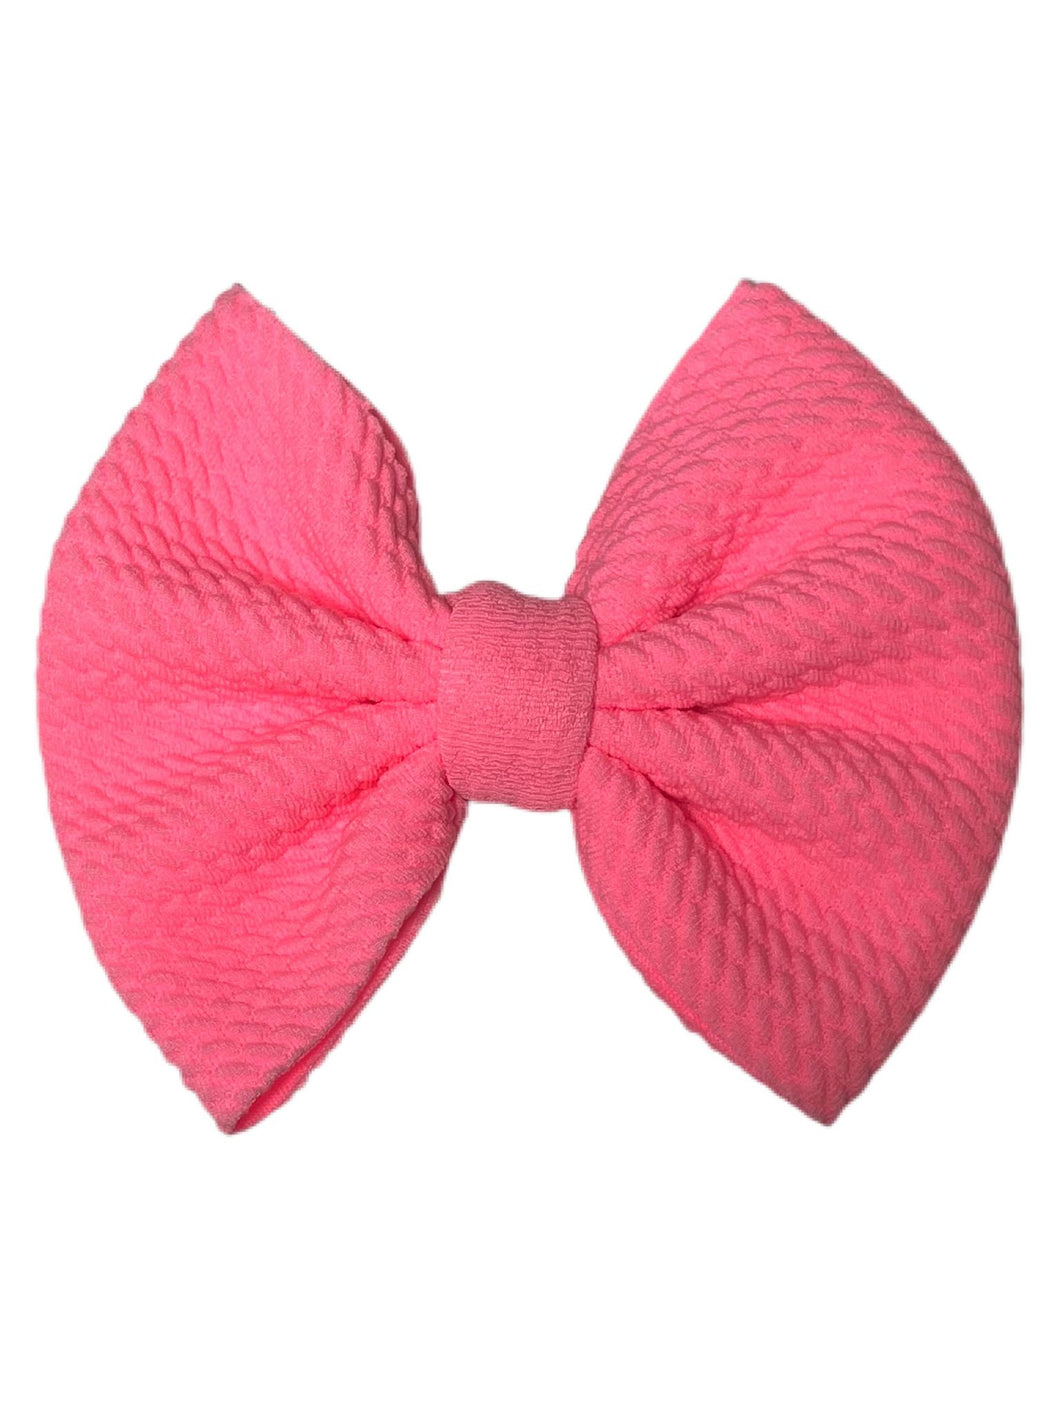 Neon Pink Bow